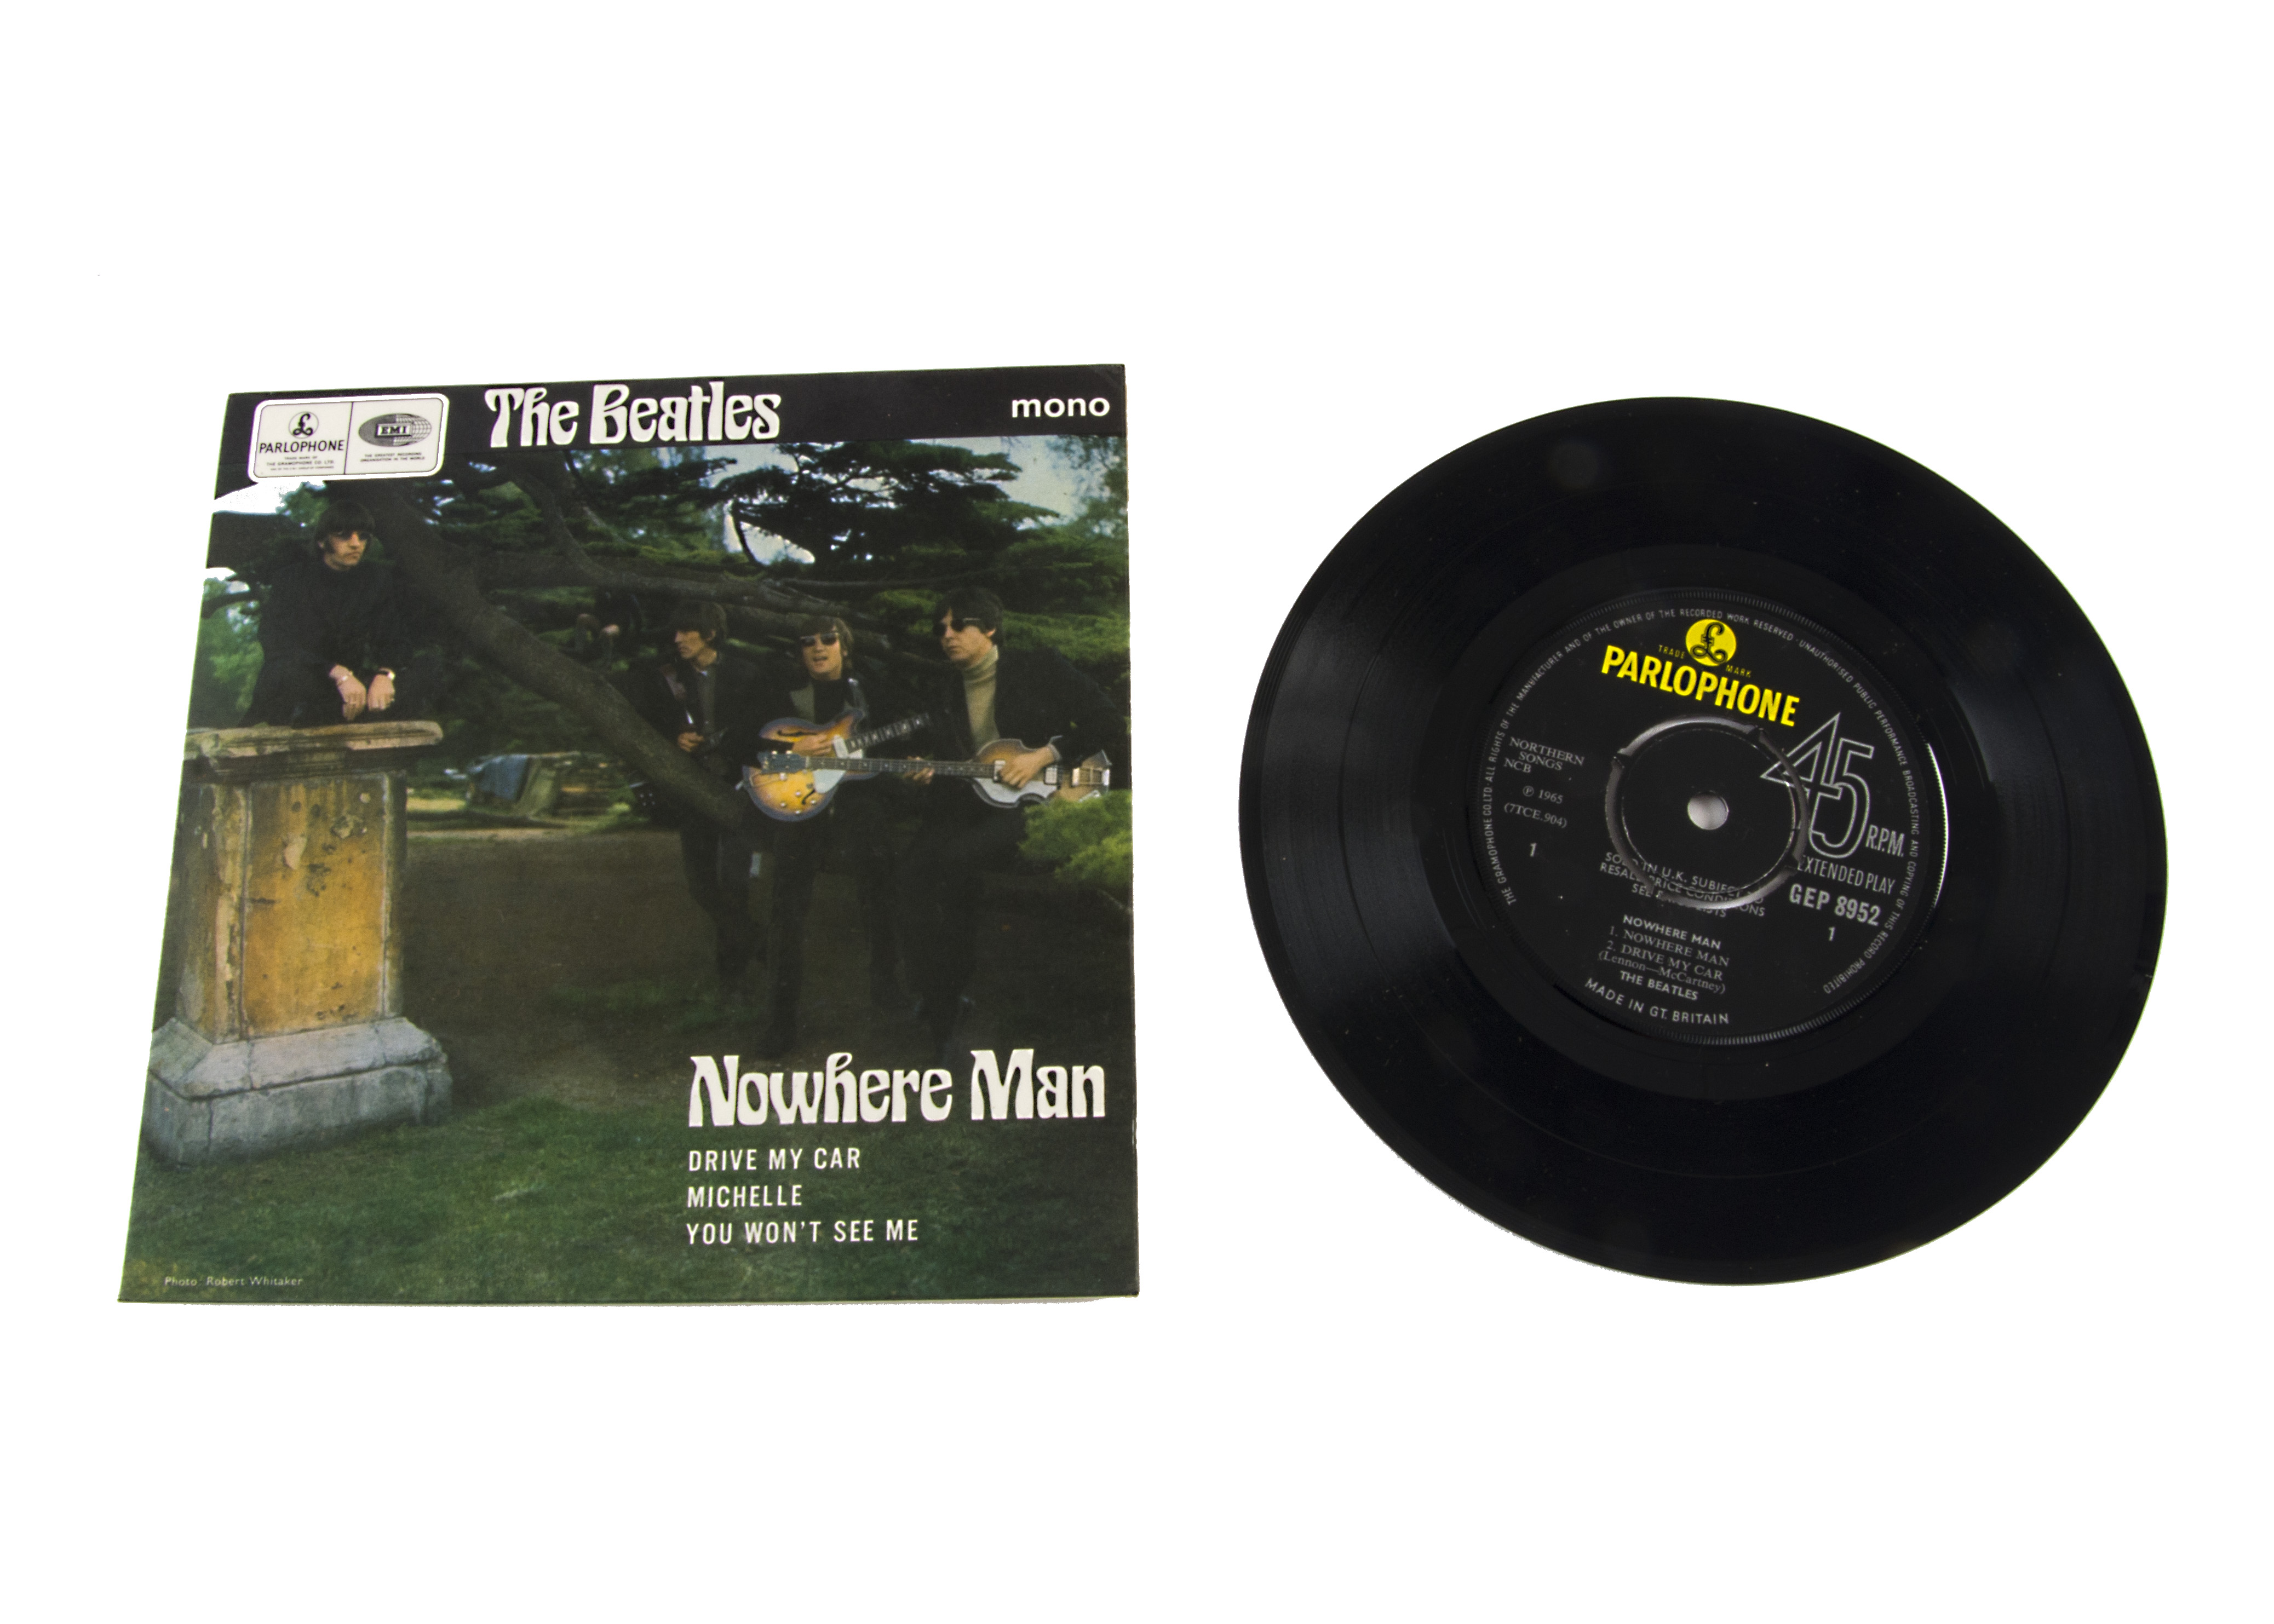 The Beatles, Nowhere Man EP - Original UK first press release 1966 on Parlophone (GEP 8952) with